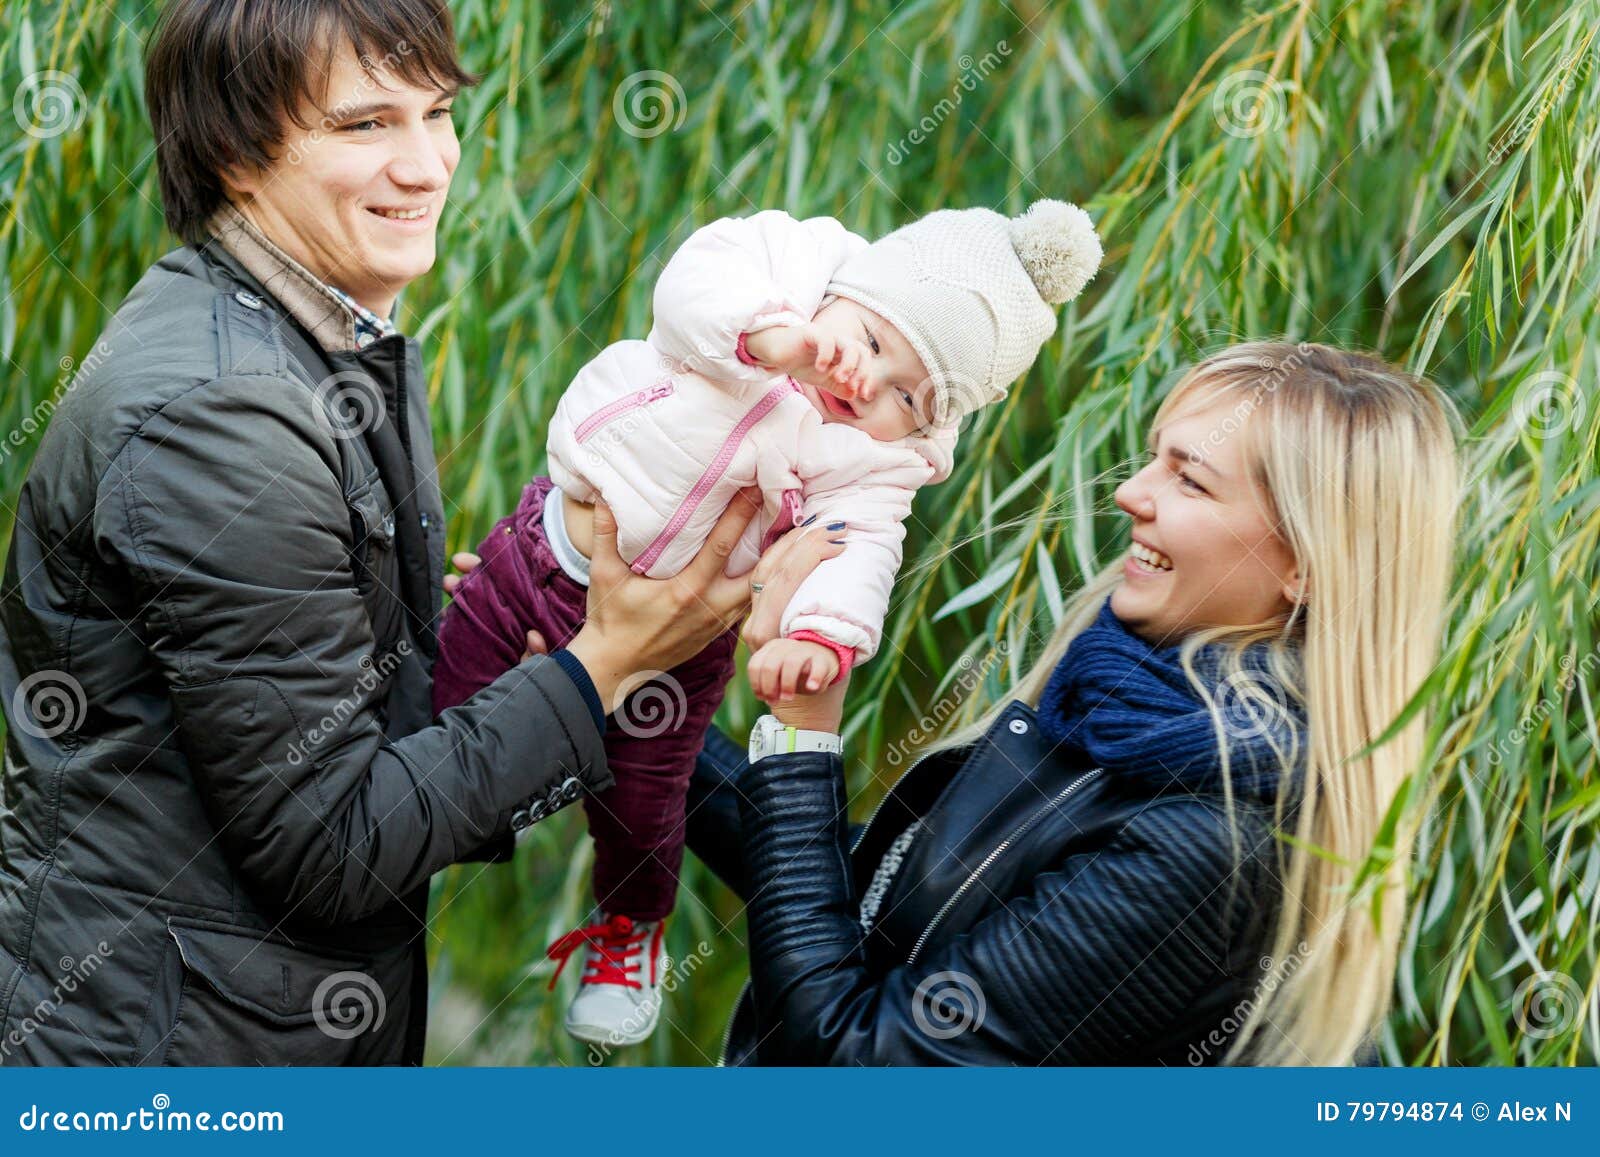 Parents Holding Baby Daughter in Park Near Trees Stock Photo ...